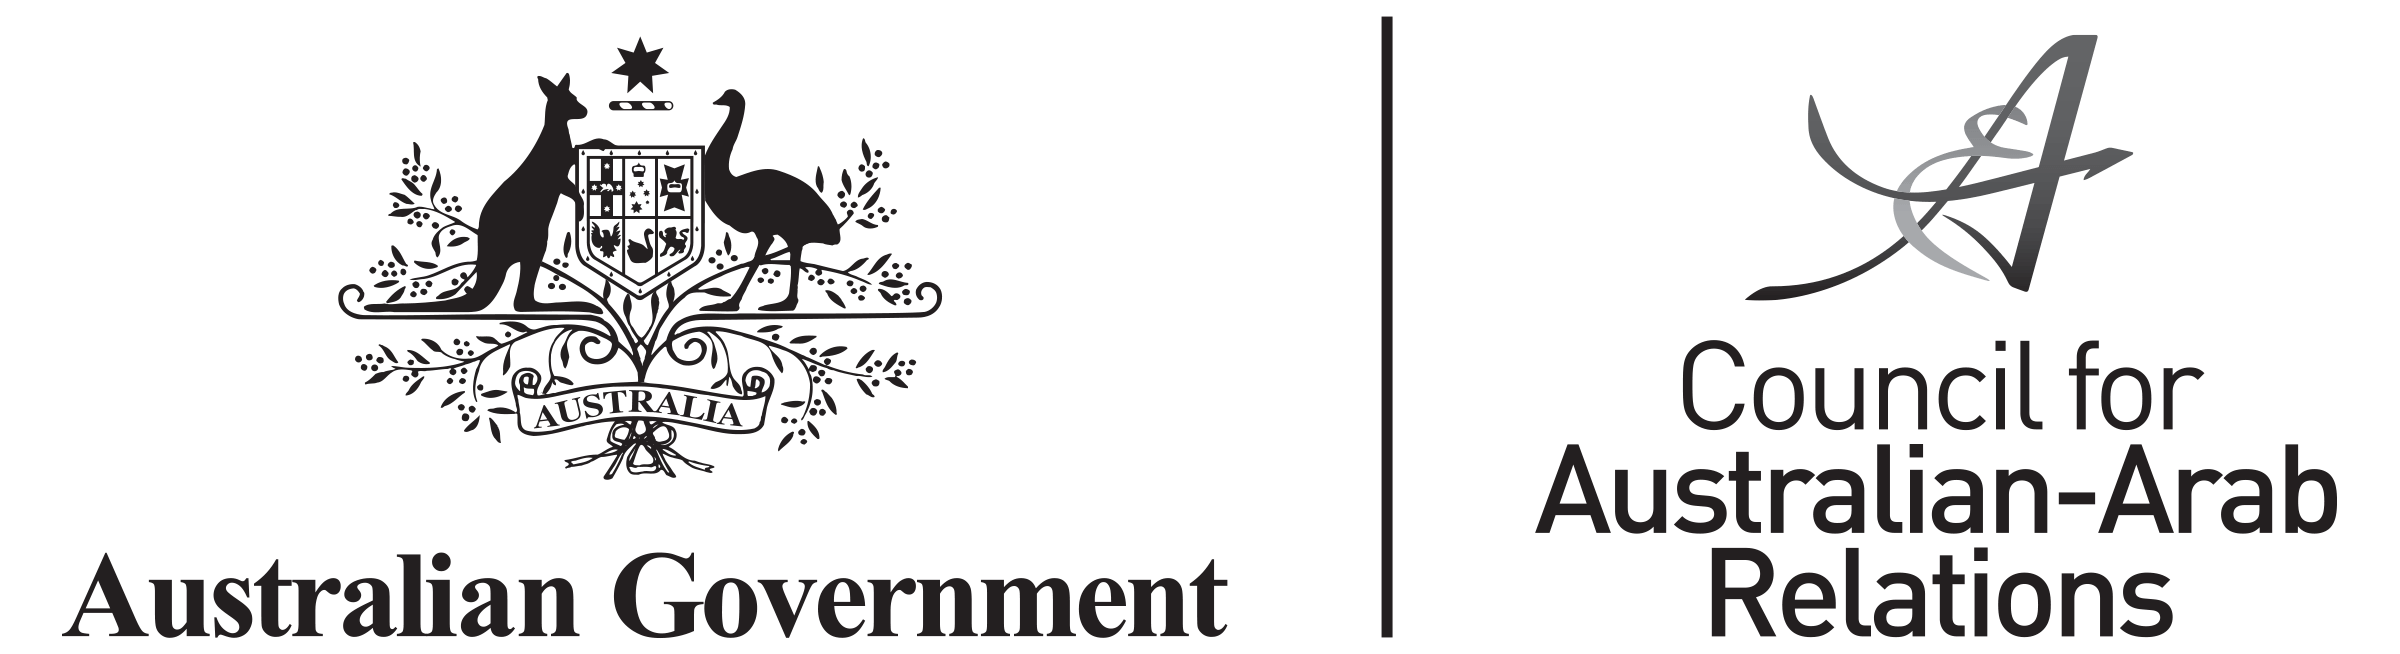 Australian Government Logo - CAAR logo and branding - Department of Foreign Affairs and Trade